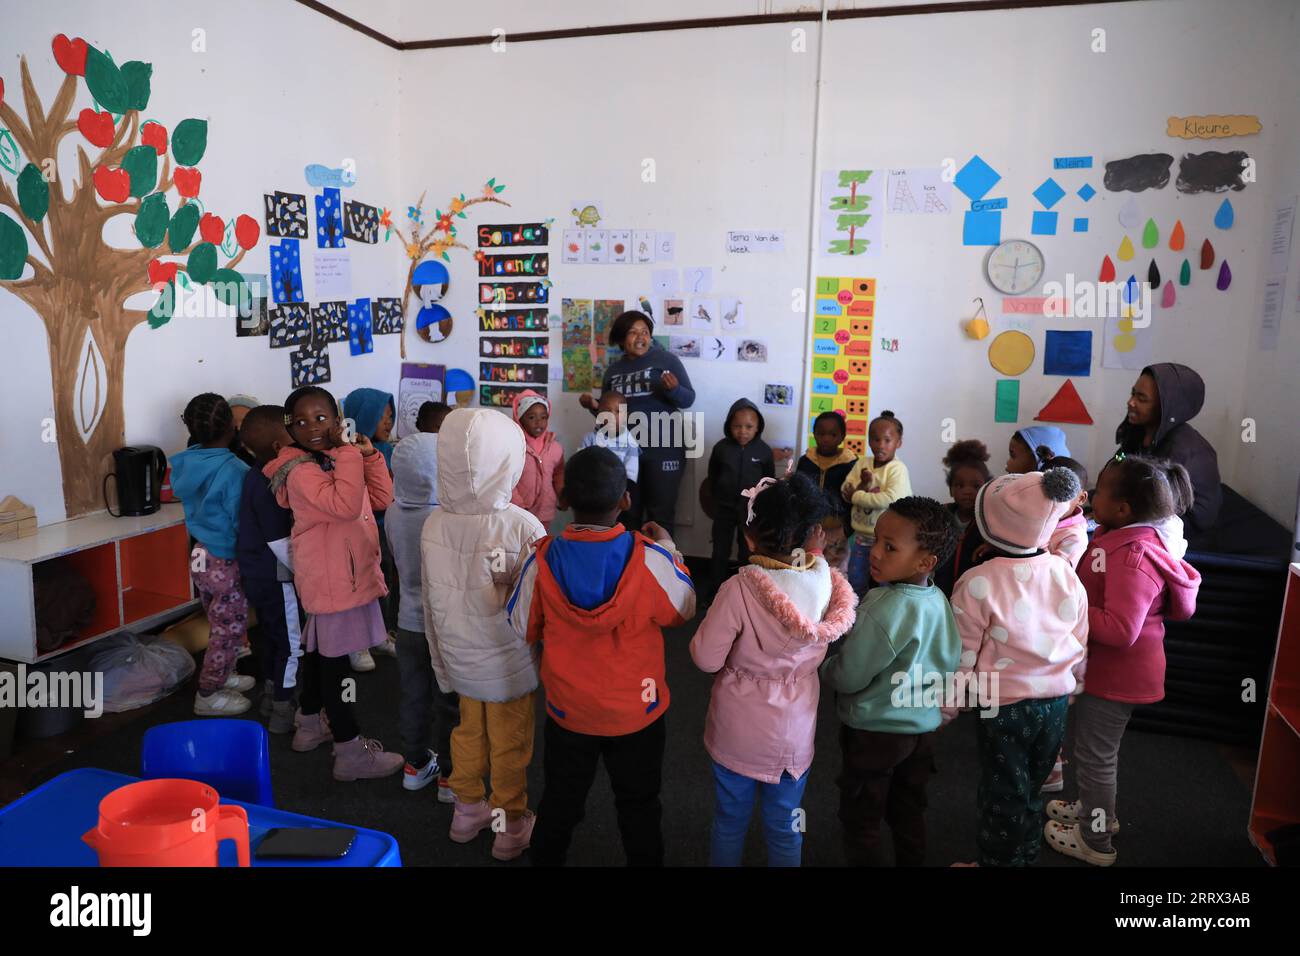 230817 -- CAPE TOWN, Aug. 17, 2023 -- A teacher gives lessons to children at an early learning center in De Aar Town, more than 750 kilometers northeast of Cape Town, South Africa, on Aug. 11, 2023. This early learning center was funded by Longyuan South Africa Renewables of China Longyuan Power Group Corporation Limited, which has funded the establishment of four early learning centers in De Aar to provide education for children from poor families. Nearly 500 children in need have been admitted to these learning centers so far.  SOUTH AFRICA-DE AAR-CHINA-EARLY LEARNING CENTER DongxJianghui PU Stock Photo